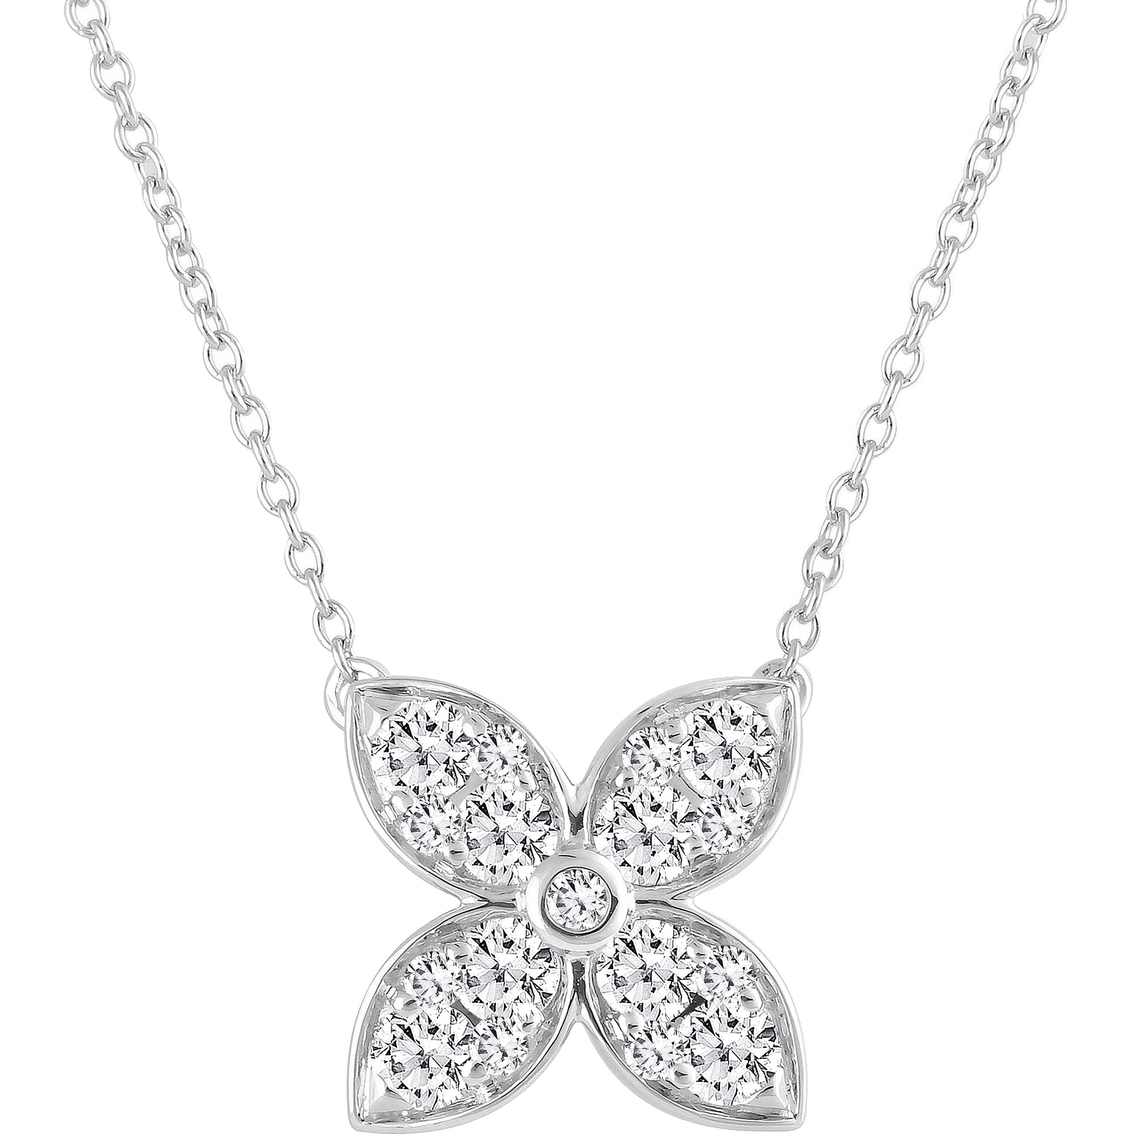 Sterling Silver 1 CTW Petal Diamond Necklace and Earring Set - Image 2 of 3